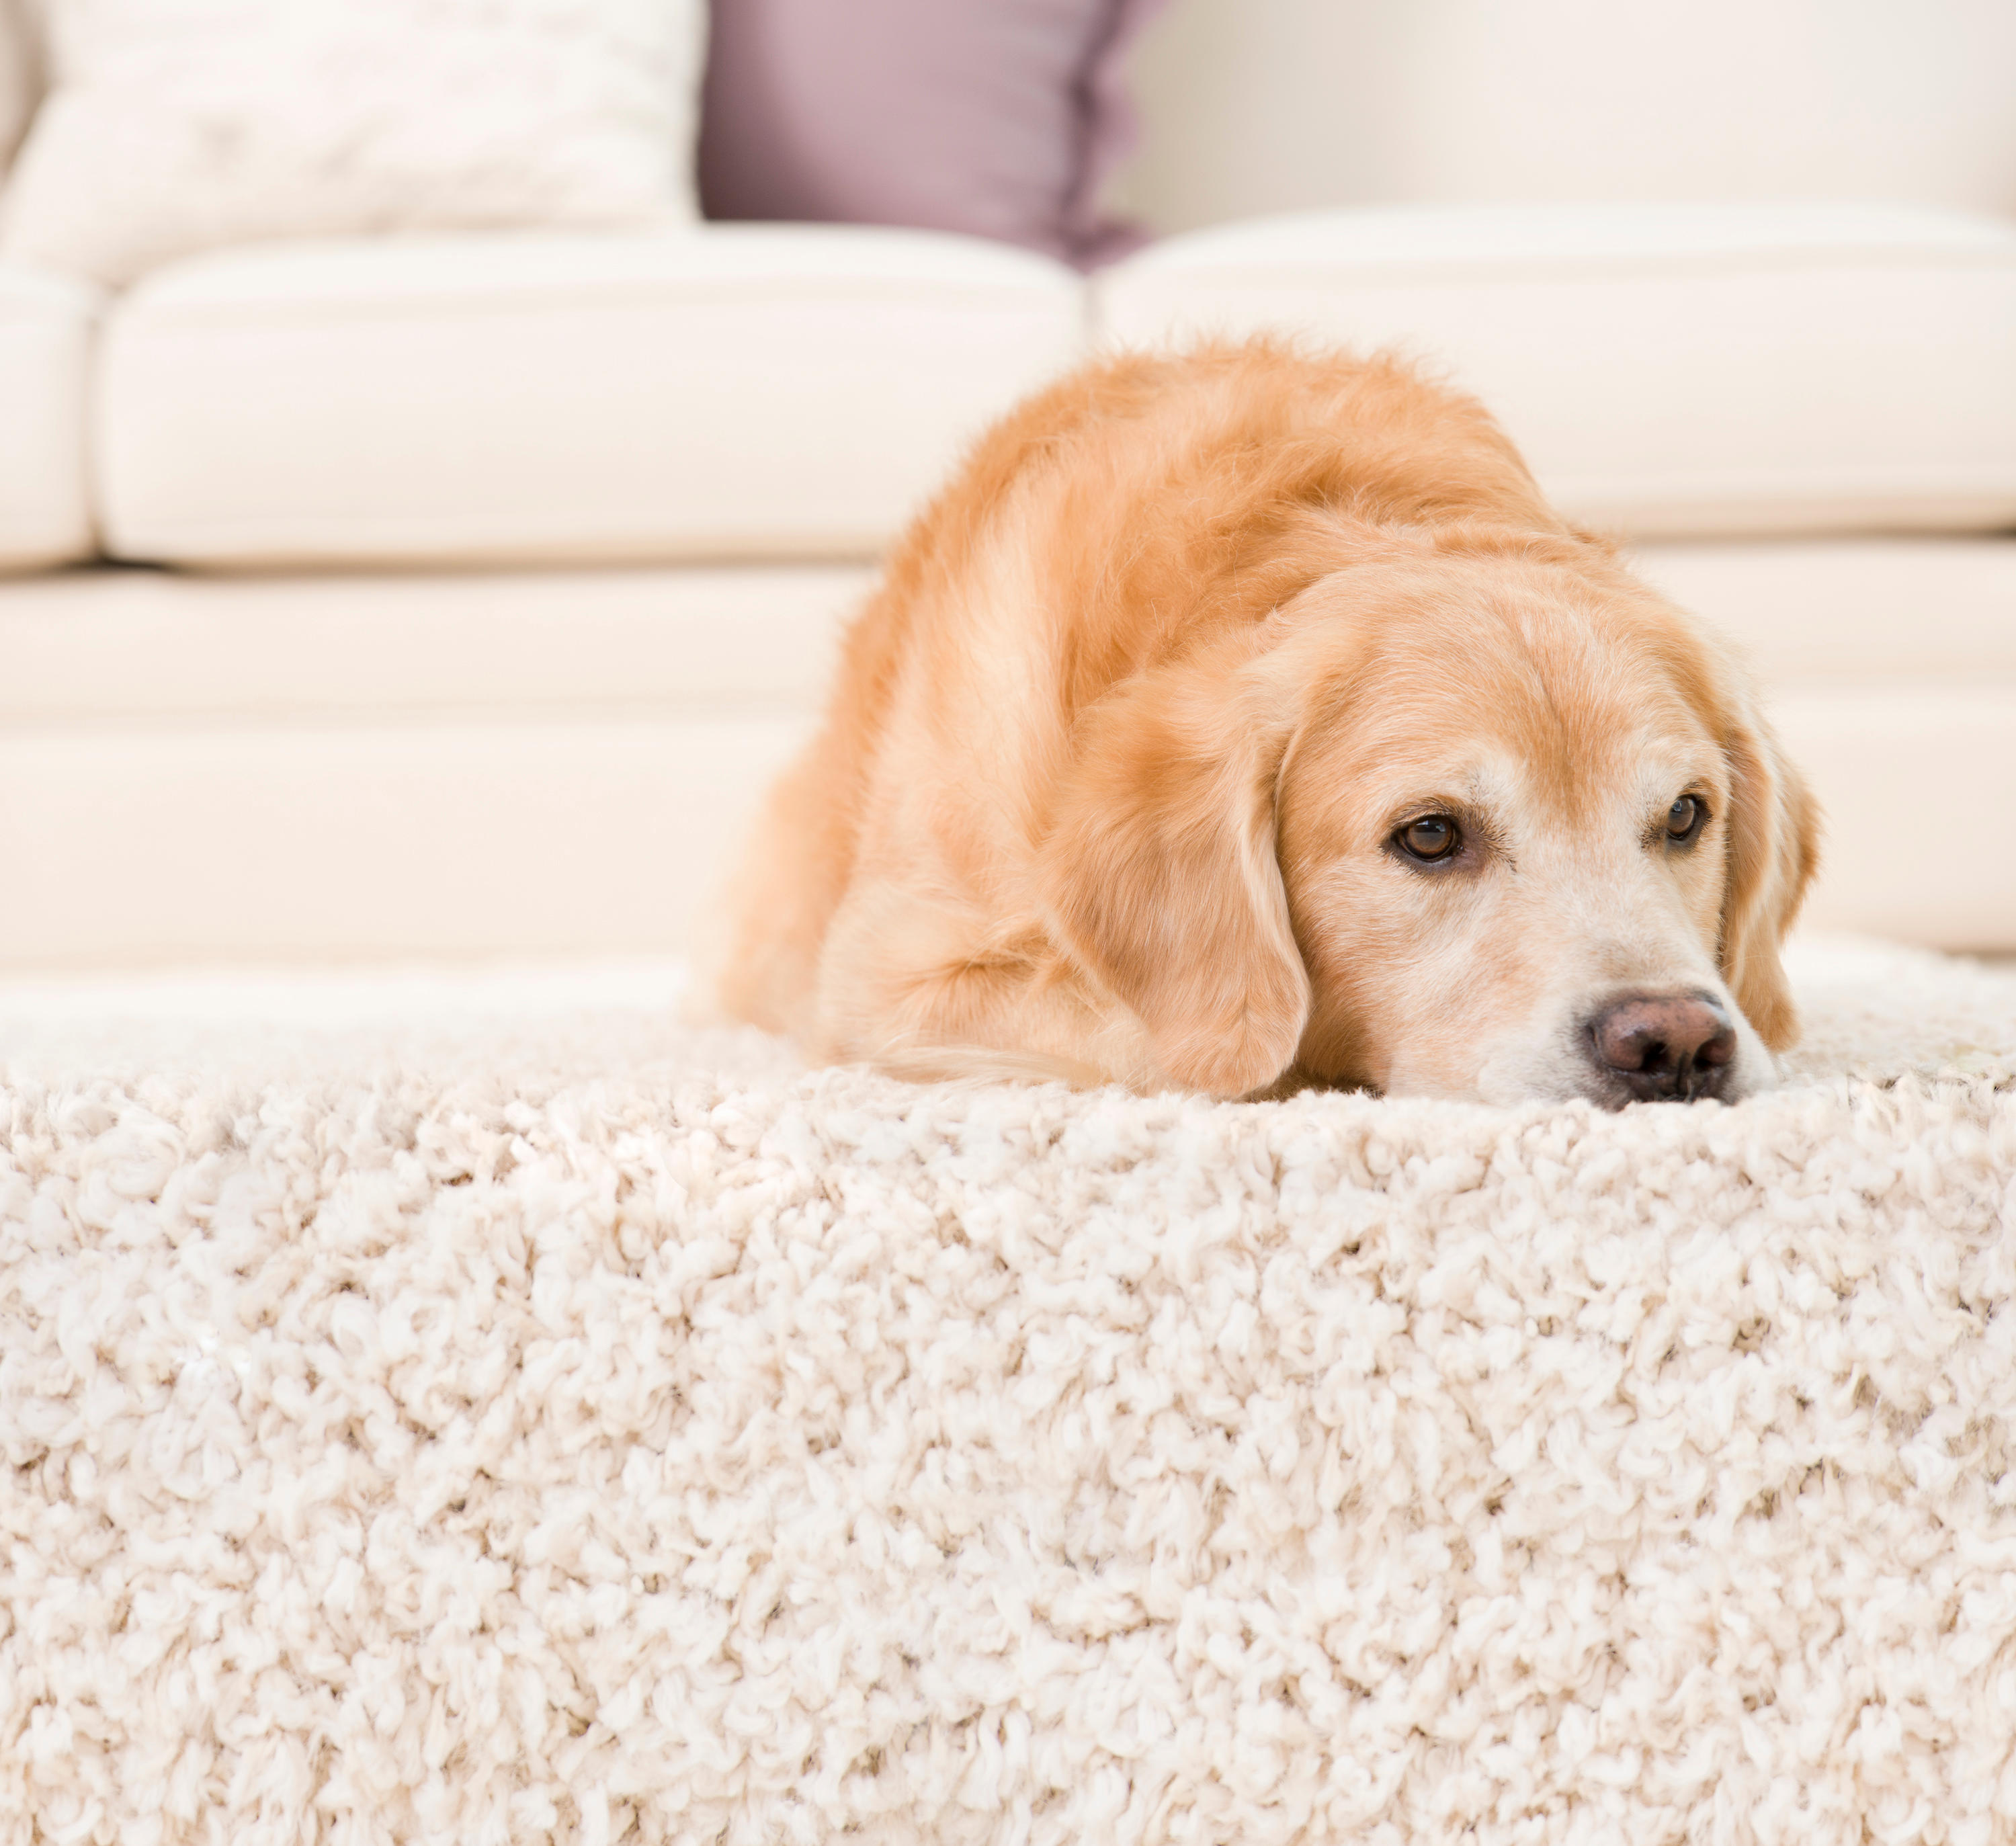 Got pet dander? One call to Zachary's Chem-Dry, and those allergens won't be a problem anymore Zachary's Chem-Dry Jacksonville (904)620-7310